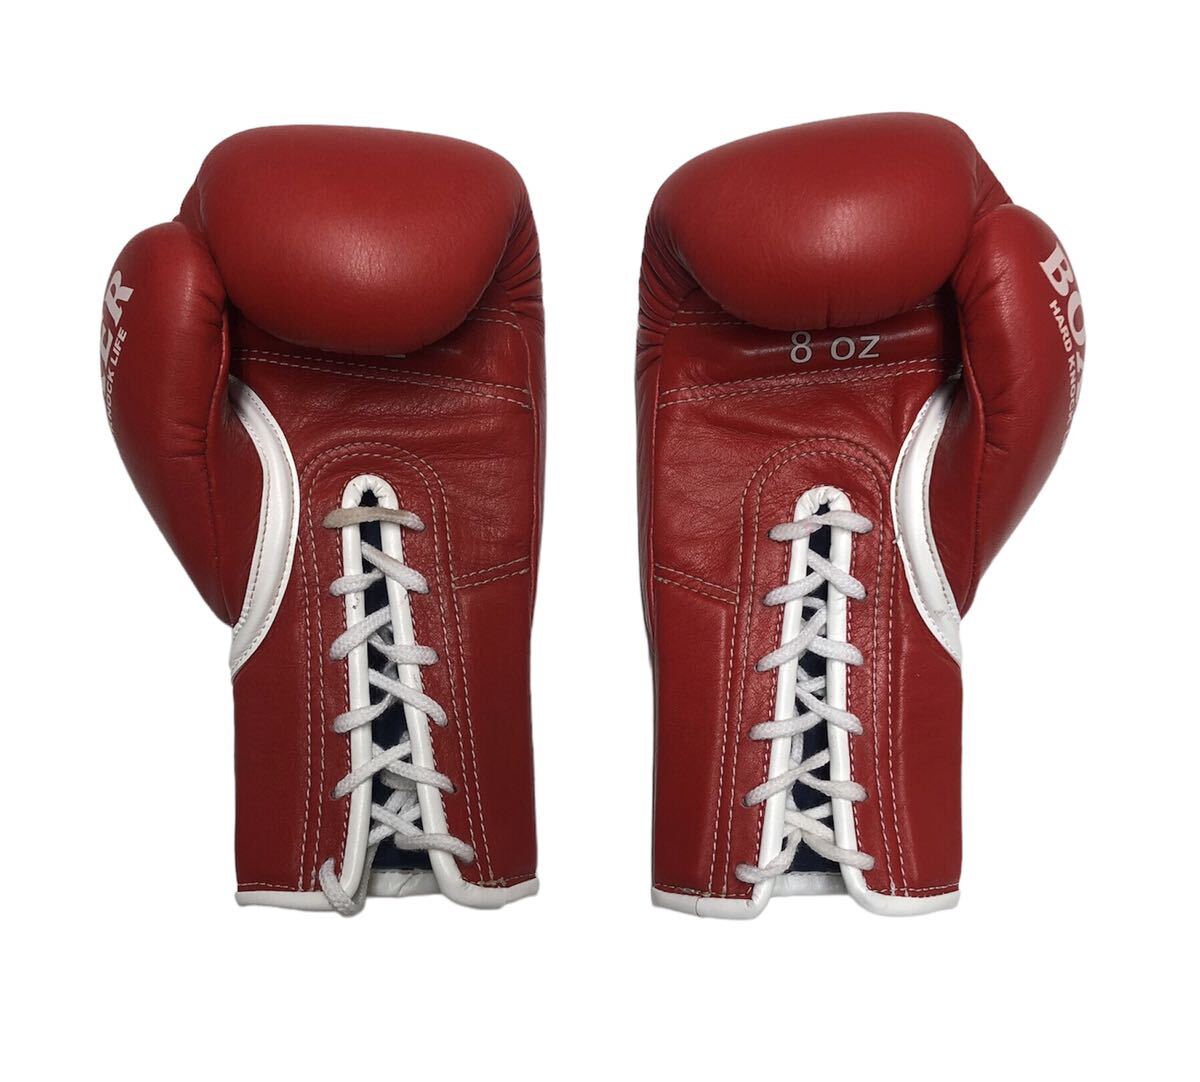 isami boxing glove red 8ozhimo type BOXING made in Japan MADE IN JAPAN